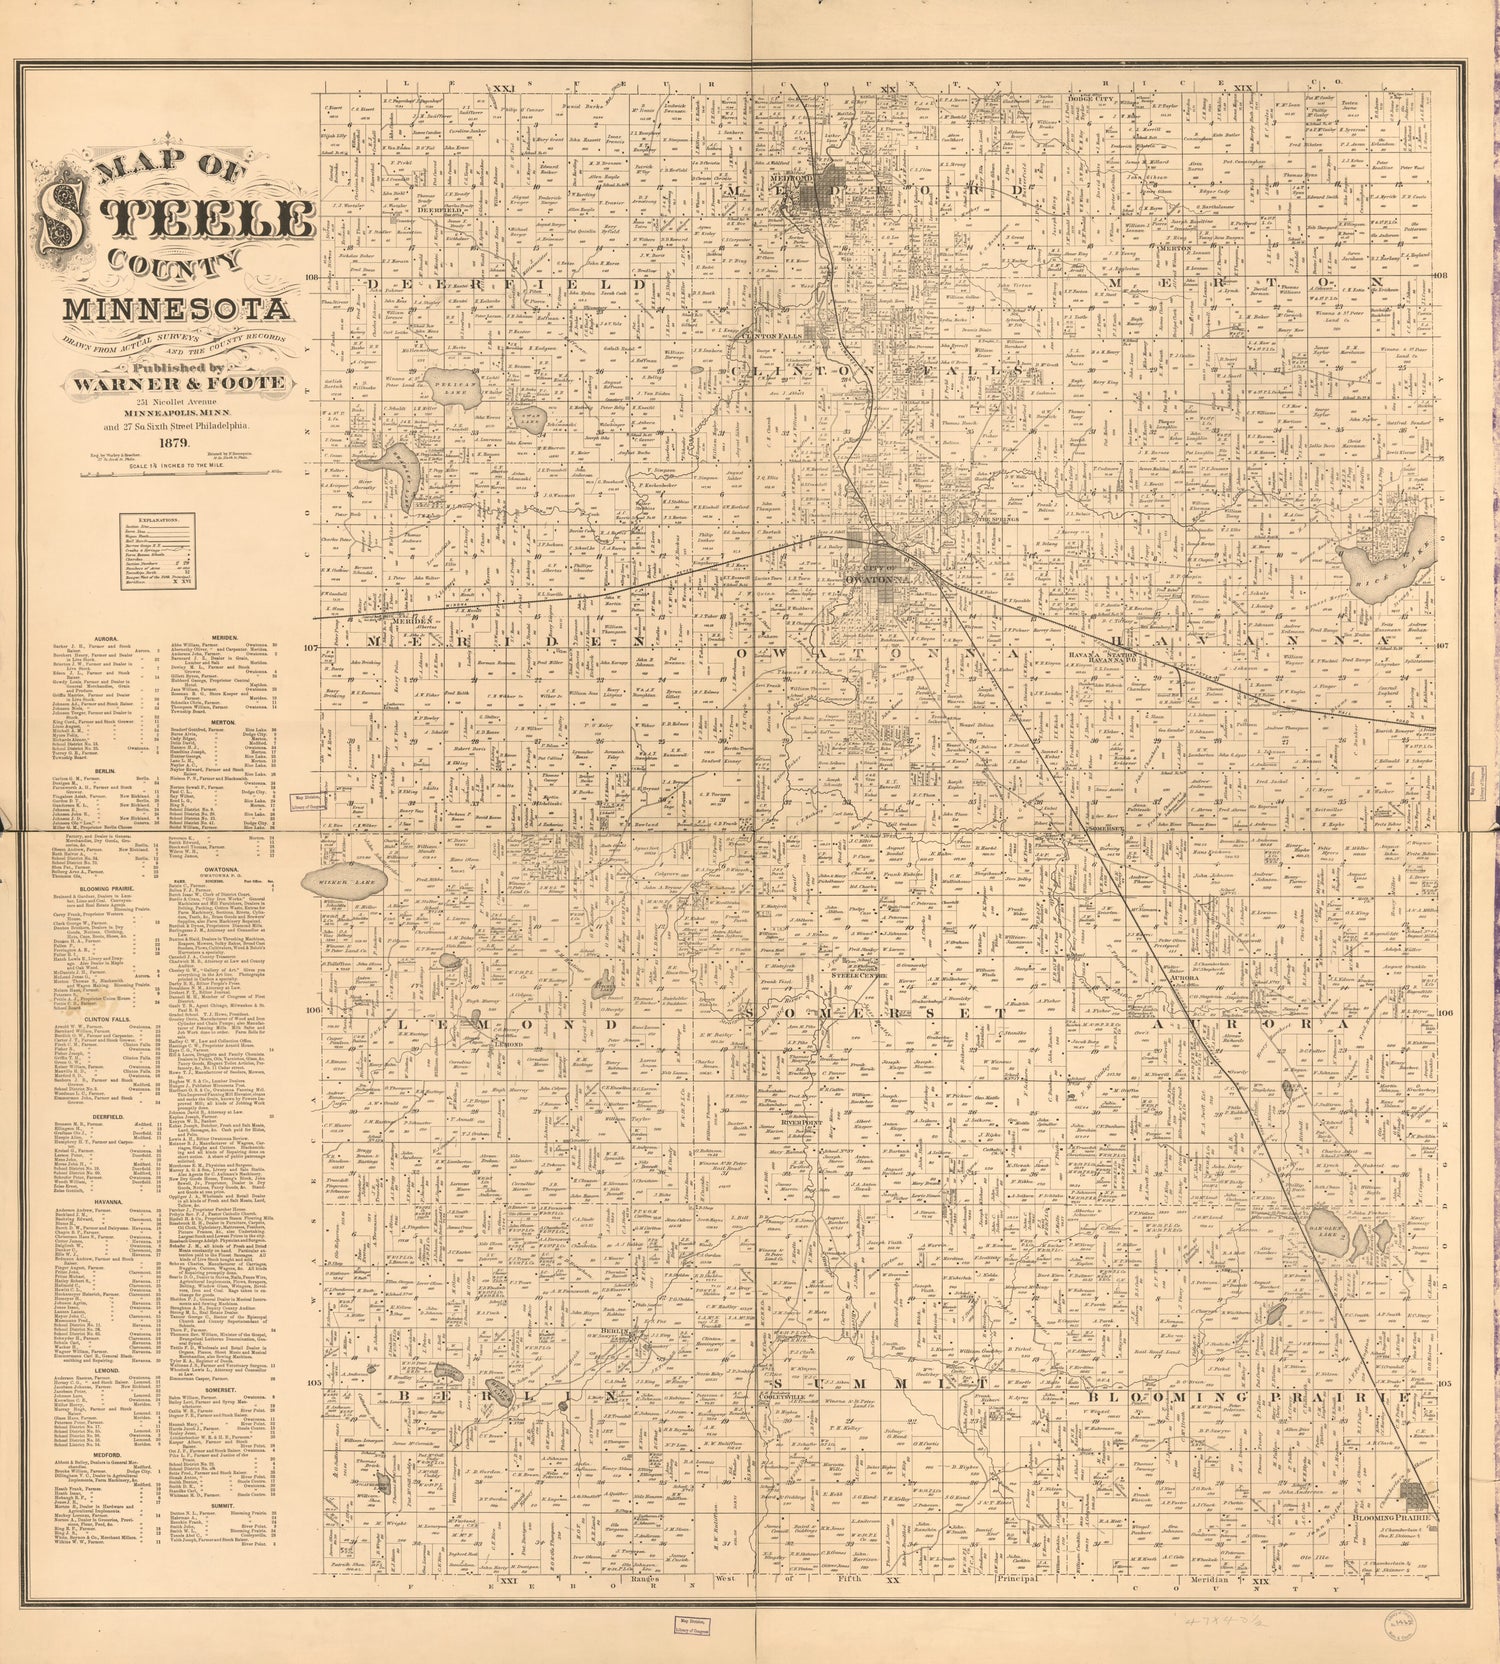 This old map of Map of Steele County, Minnesota : Drawn from Actual Surveys and the County Records from 1879 was created by  Warner &amp; Foote,  Worley &amp; Bracher in 1879